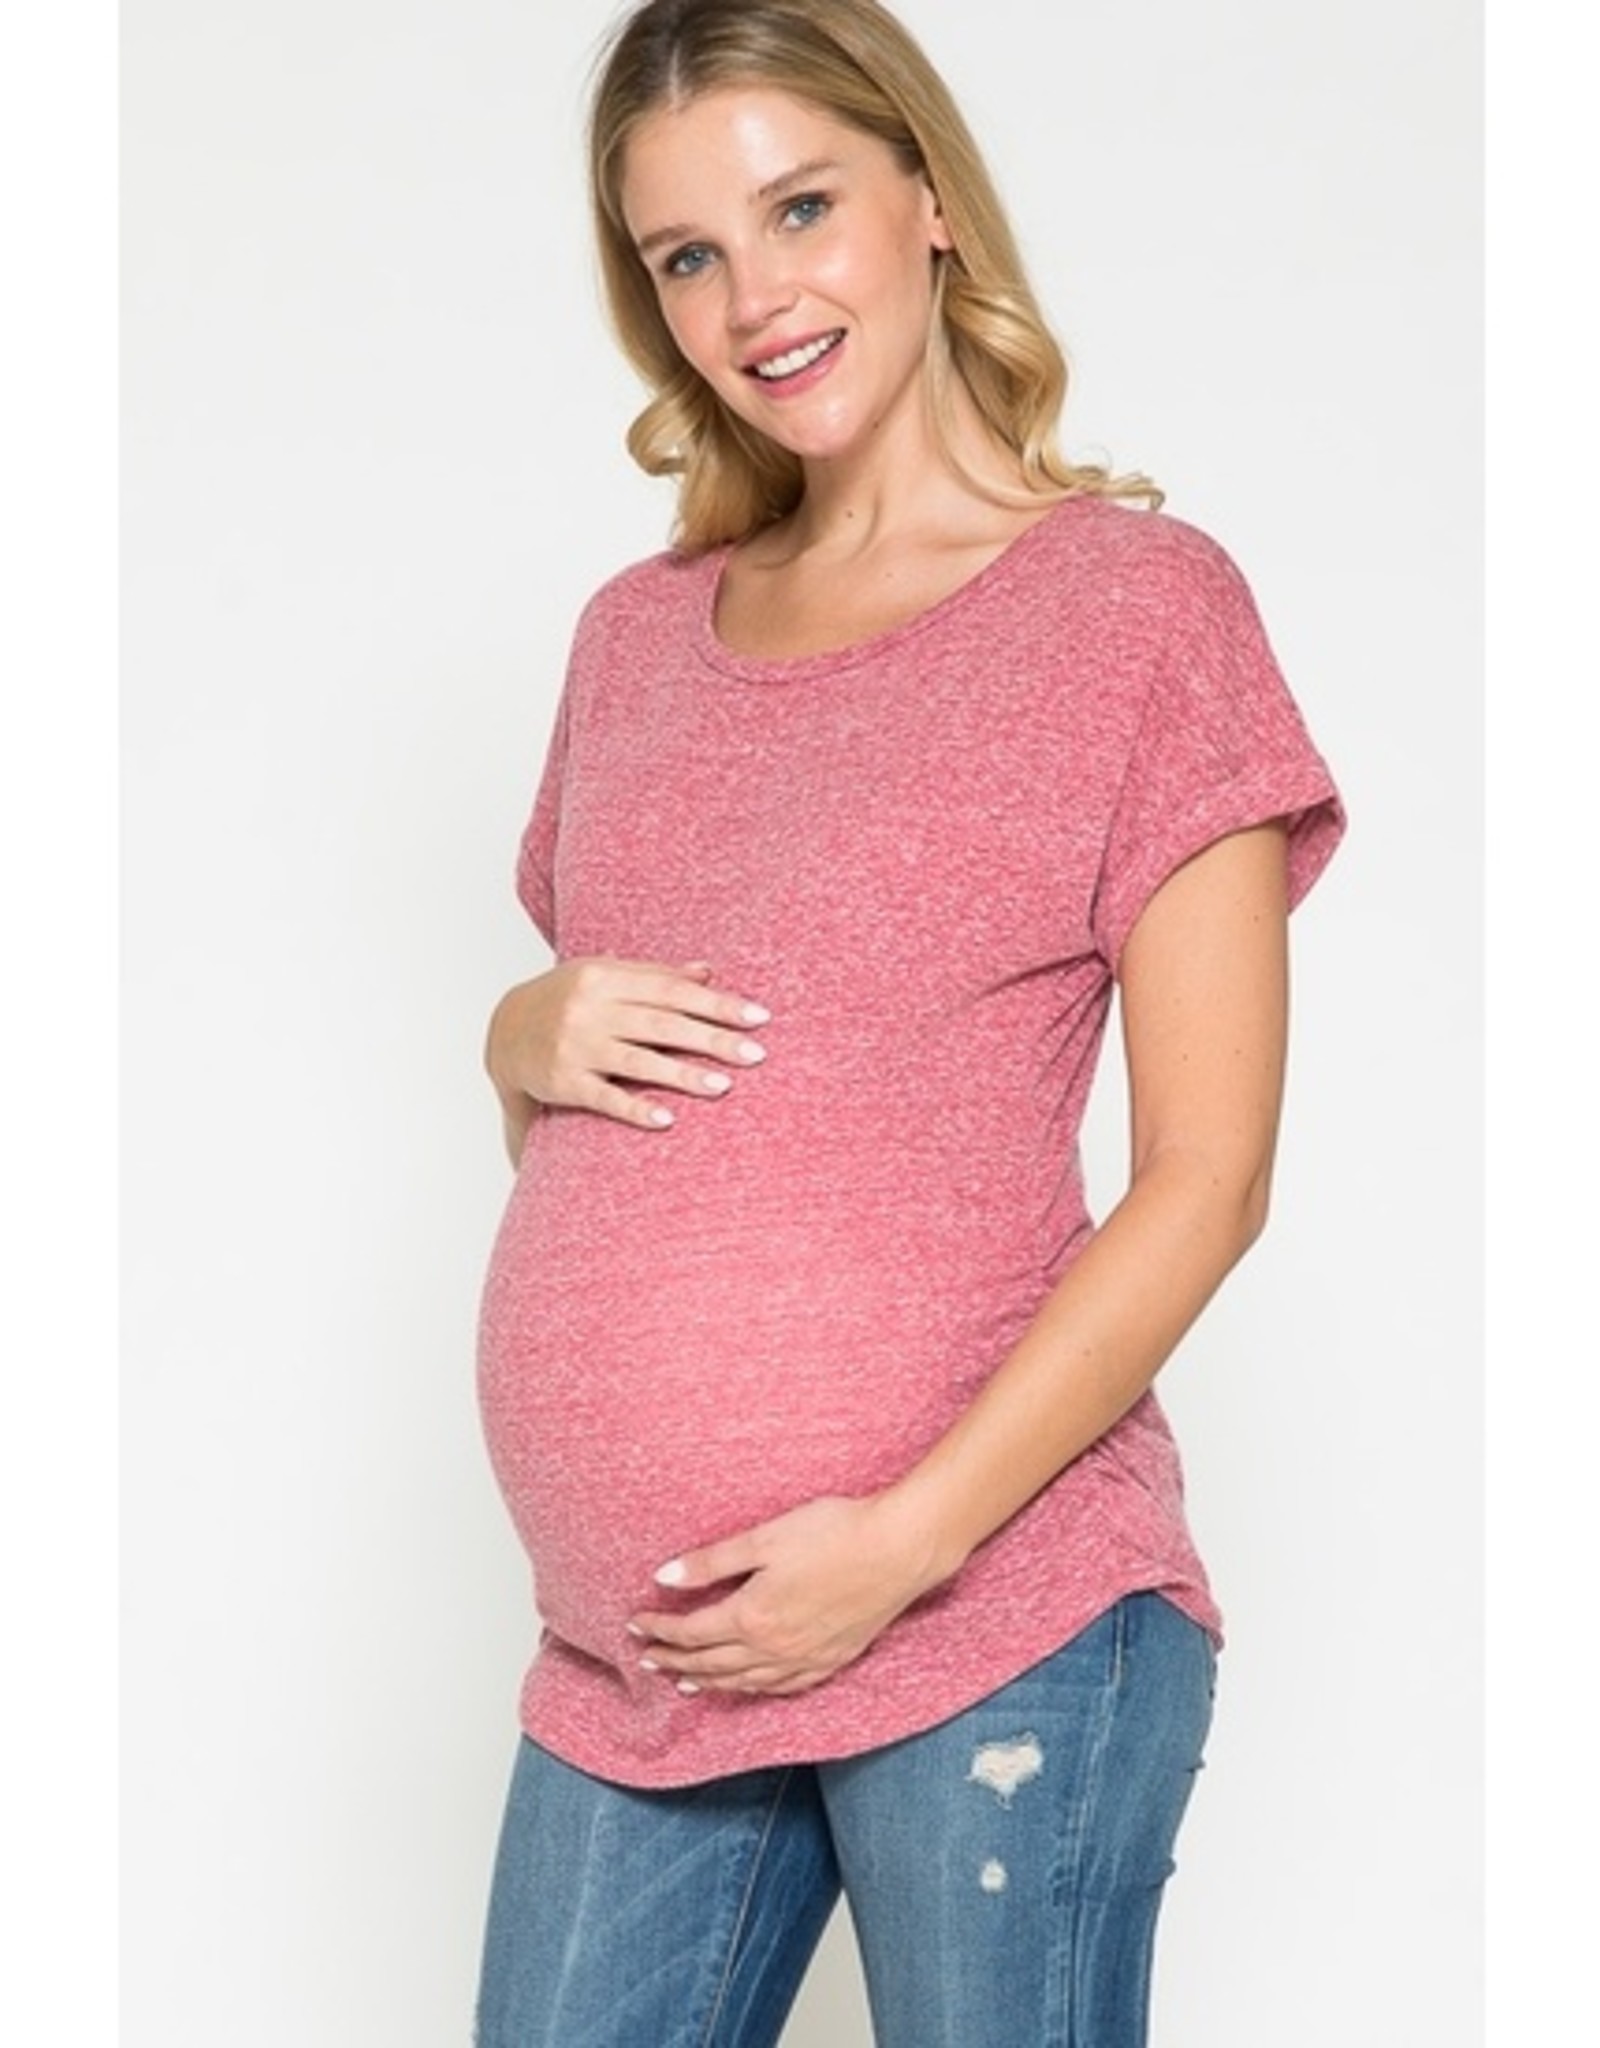 MATERNITY TOP DOLMAN SLEEVE SIDE RUCHED